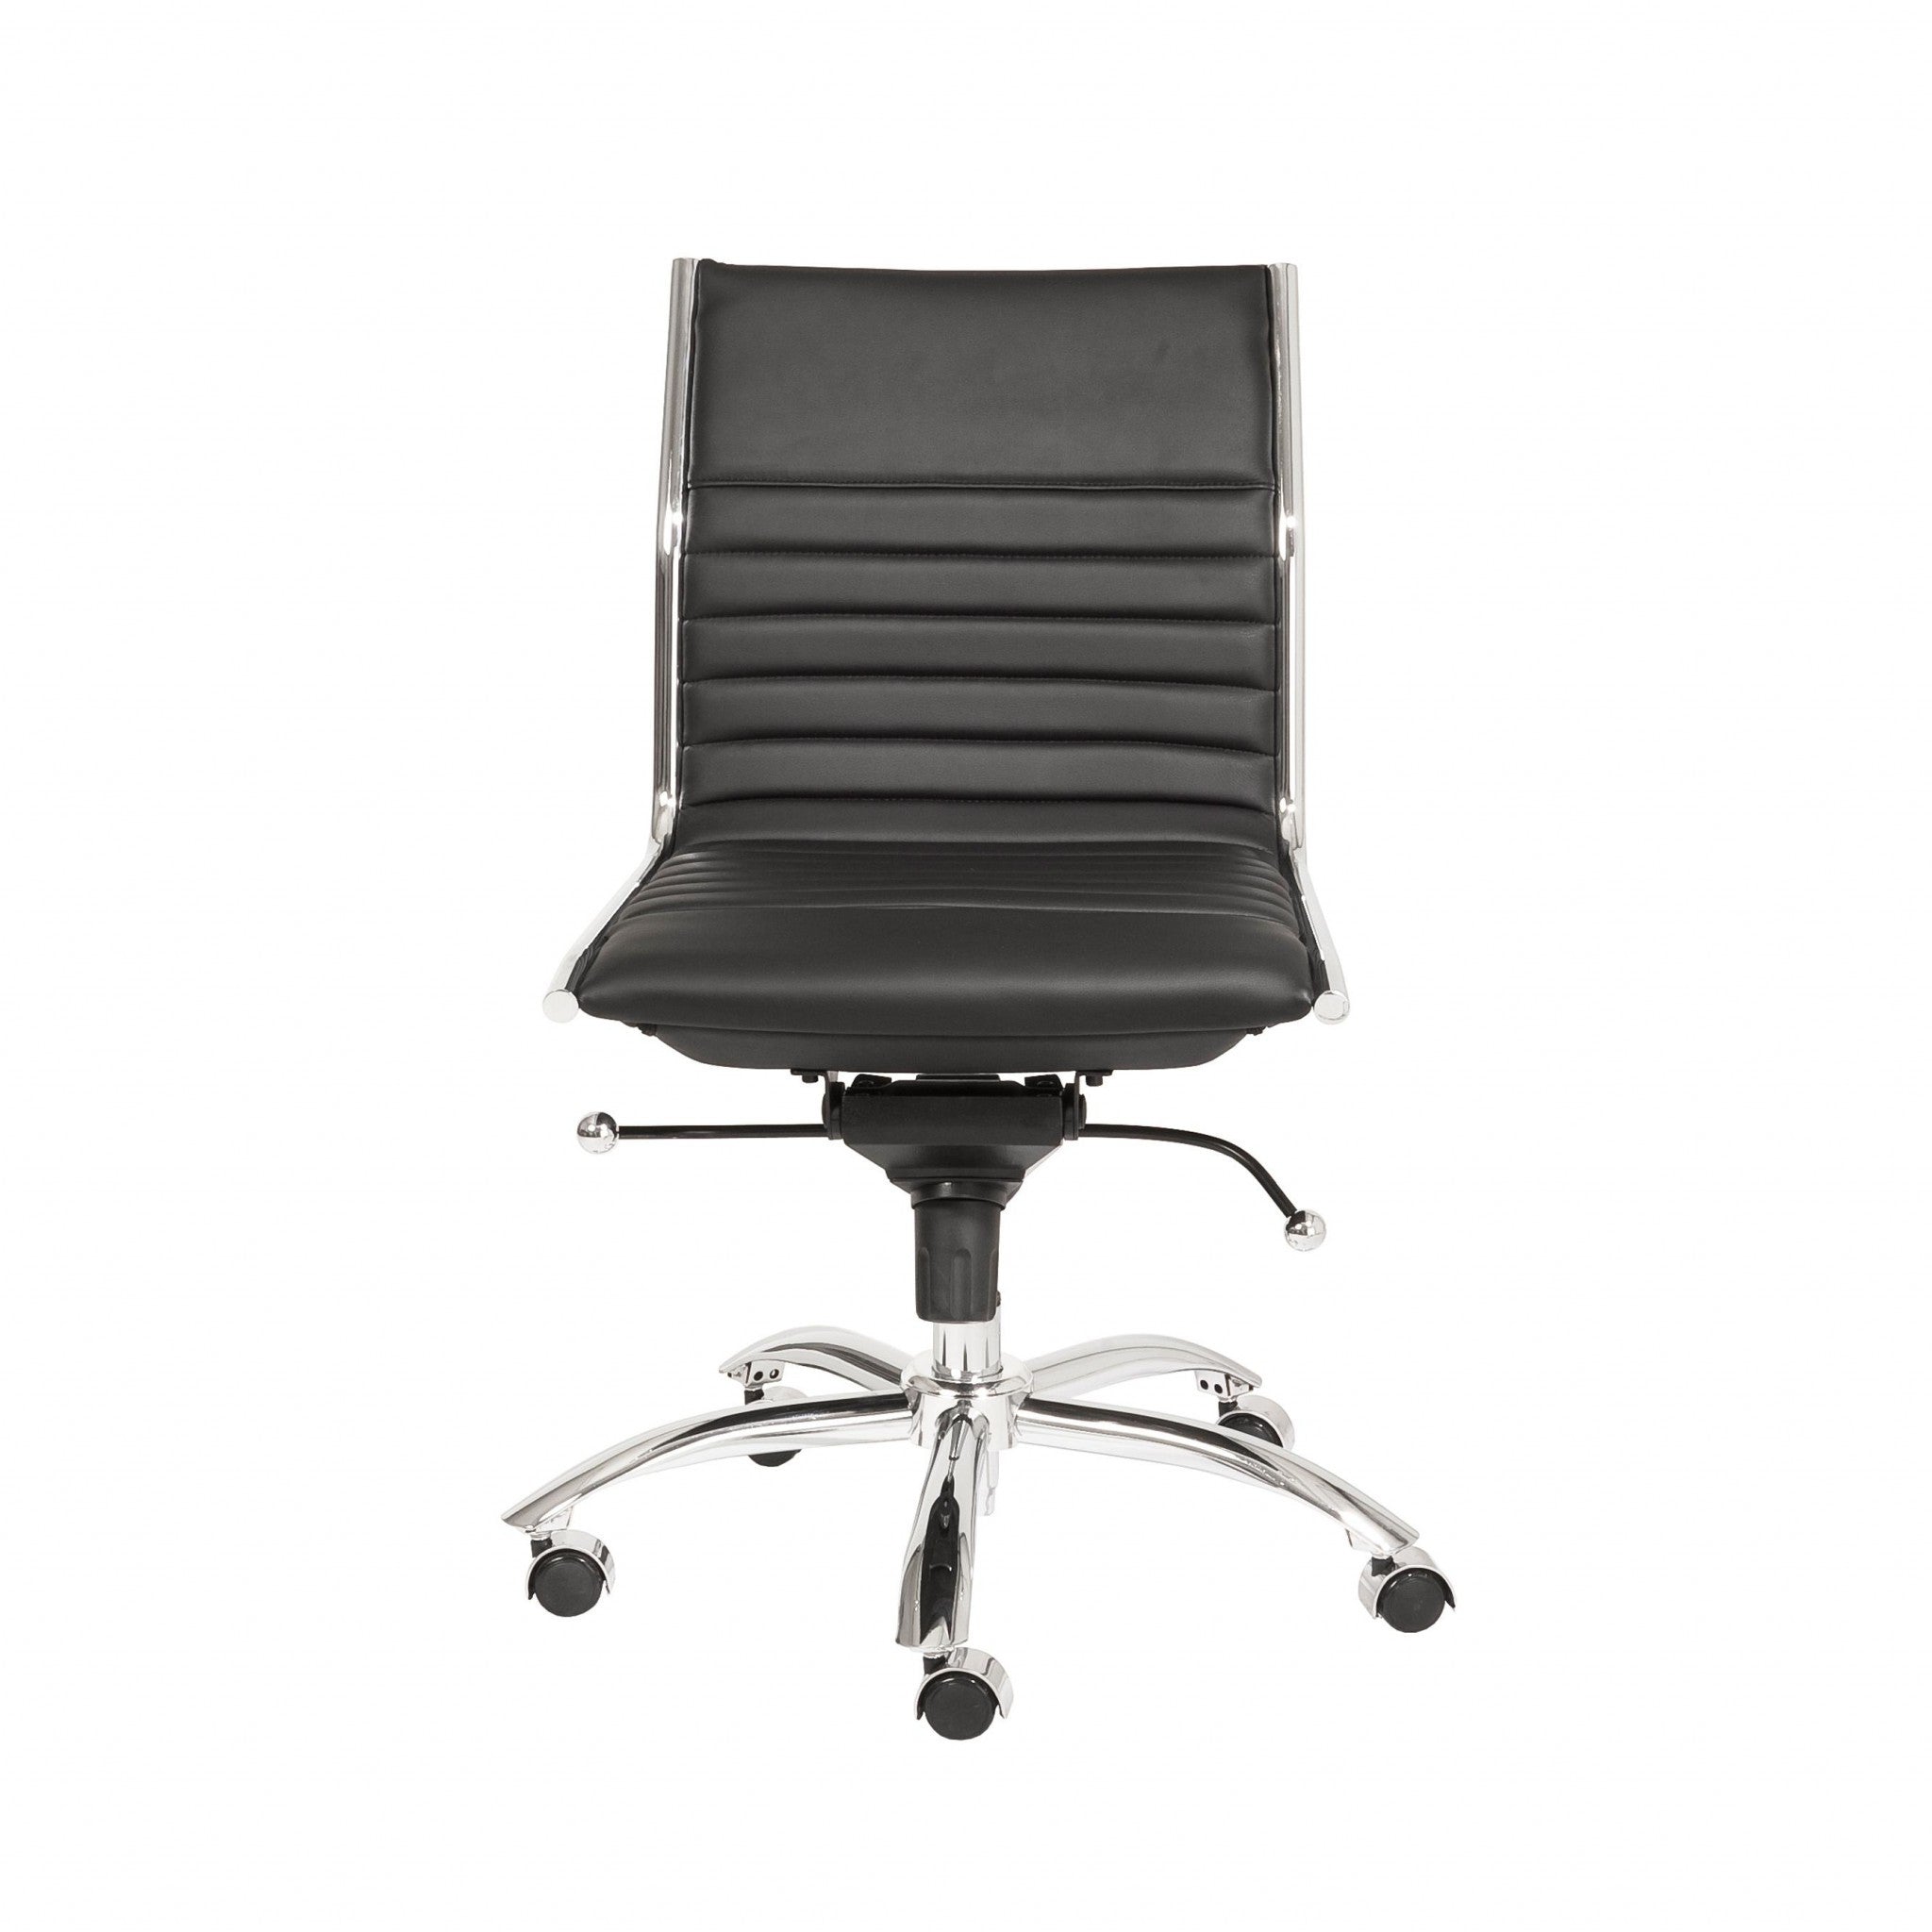 Black Faux Leather Seat Swivel Adjustable Task Chair Leather Back Steel Frame